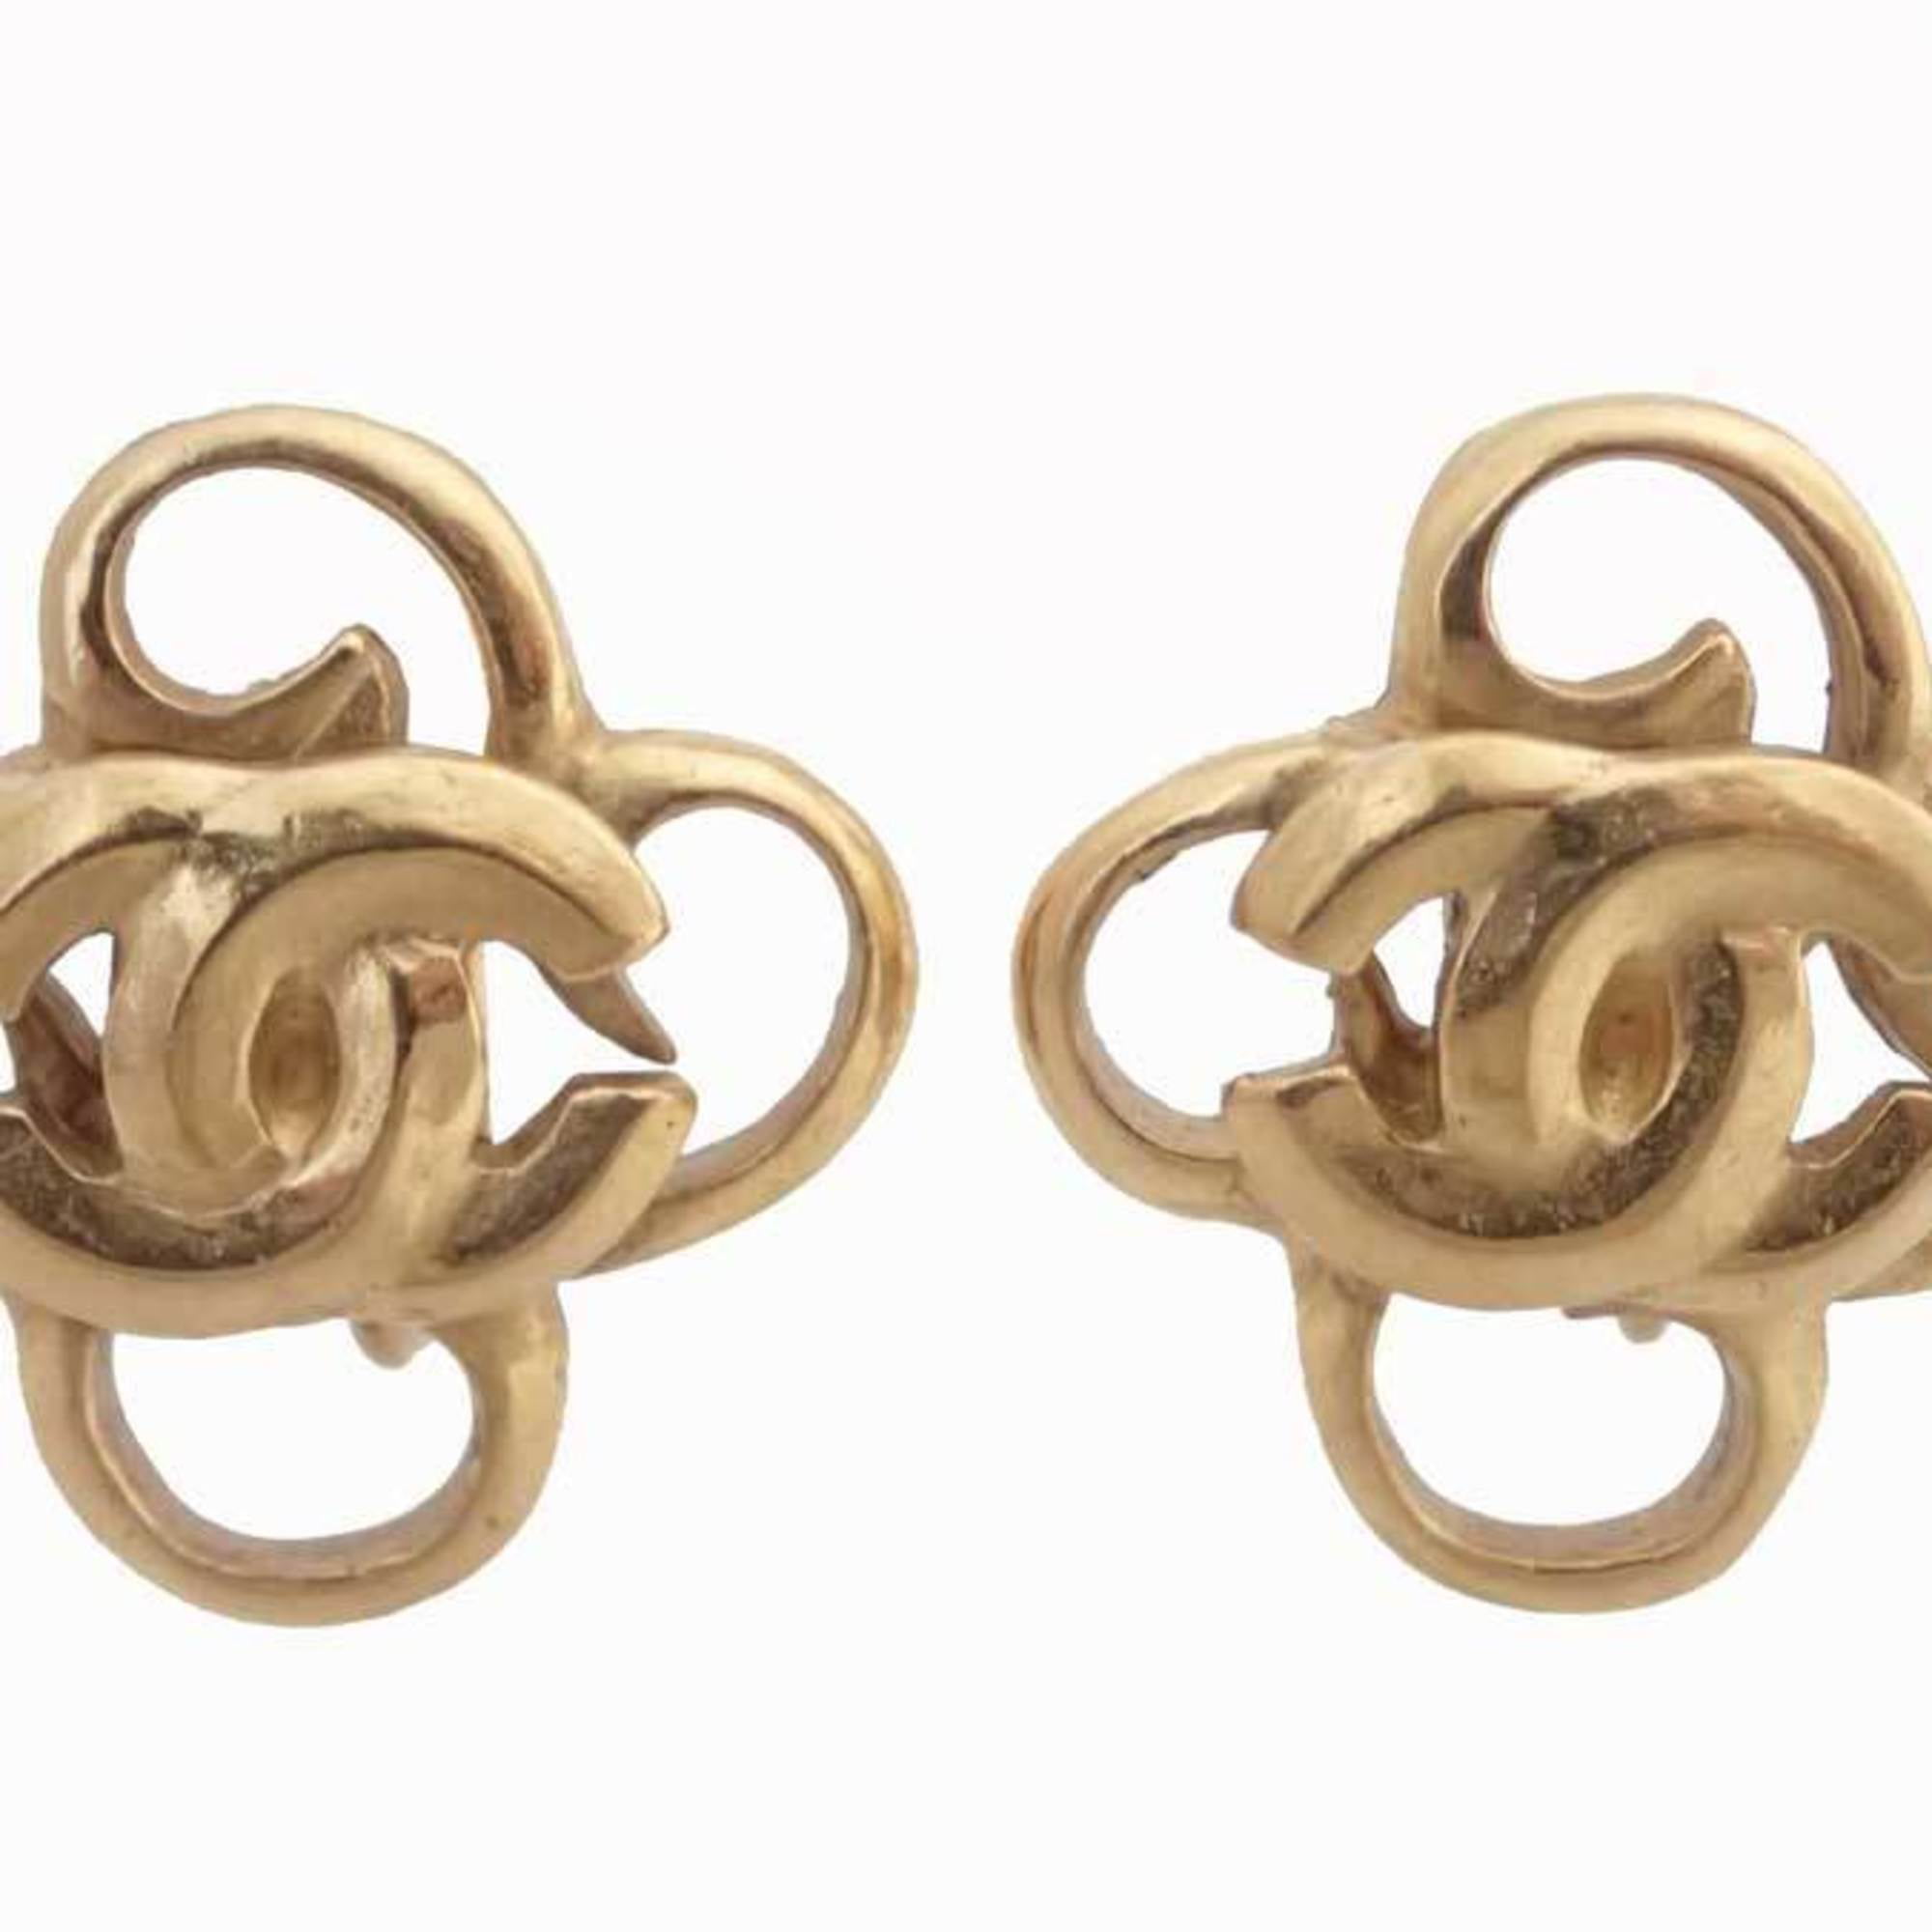 Authenticated Used Chanel CHANEL earrings here mark gold metal material  ladies